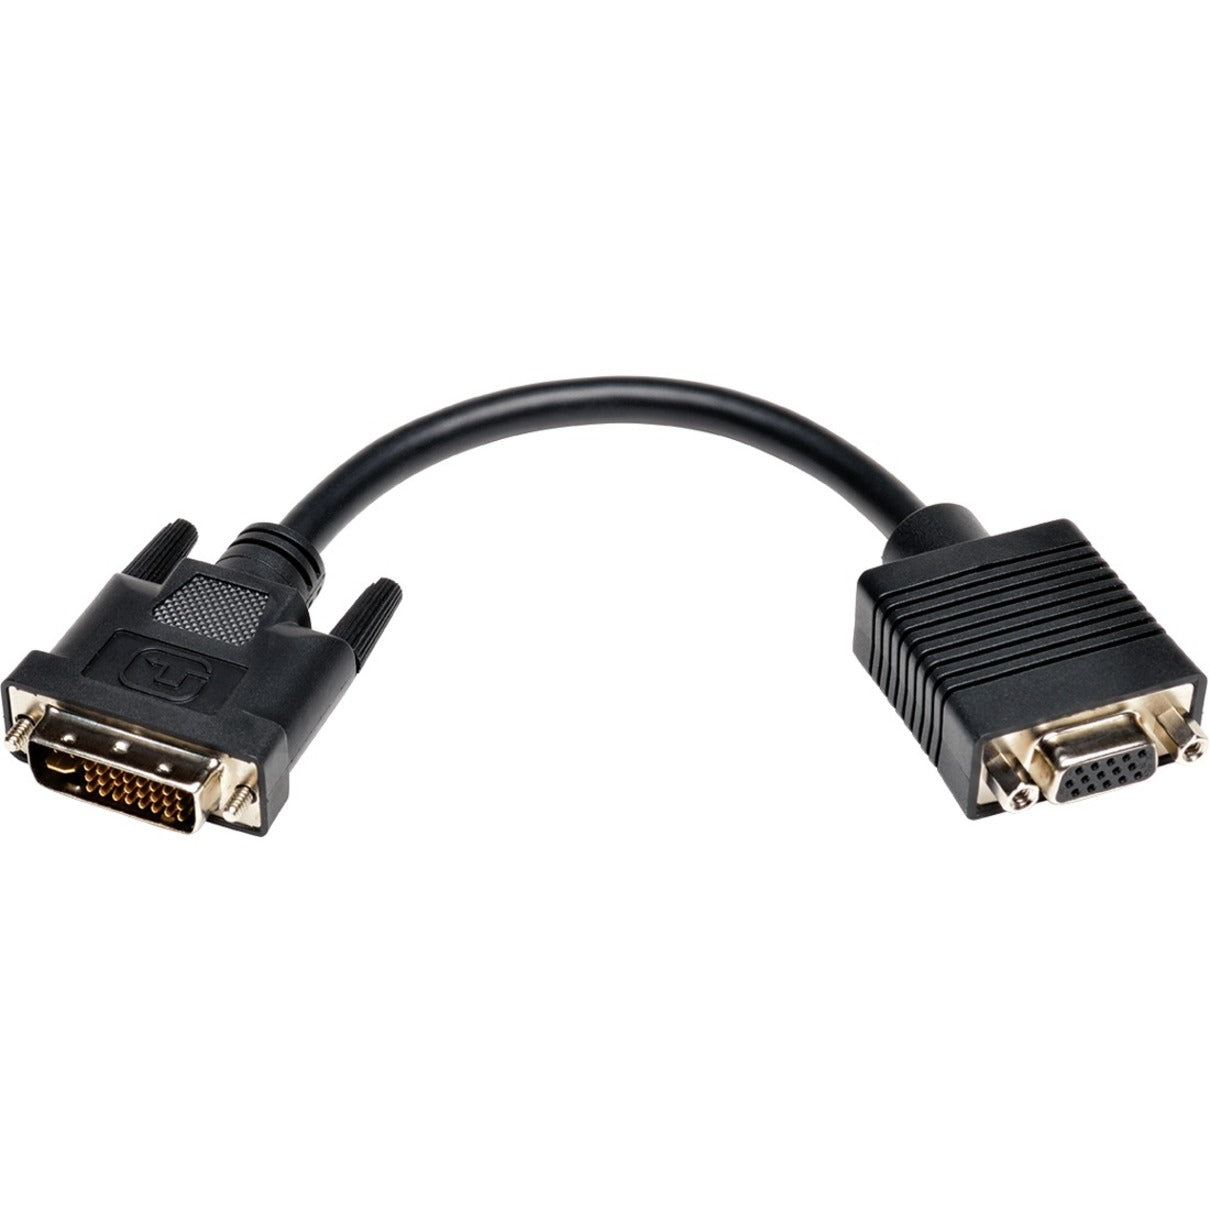 Tripp Lite P120-08N 8-in. DVI to VGA Adapter Cable, Molded, 1920 x 1200 Supported Resolution, Black